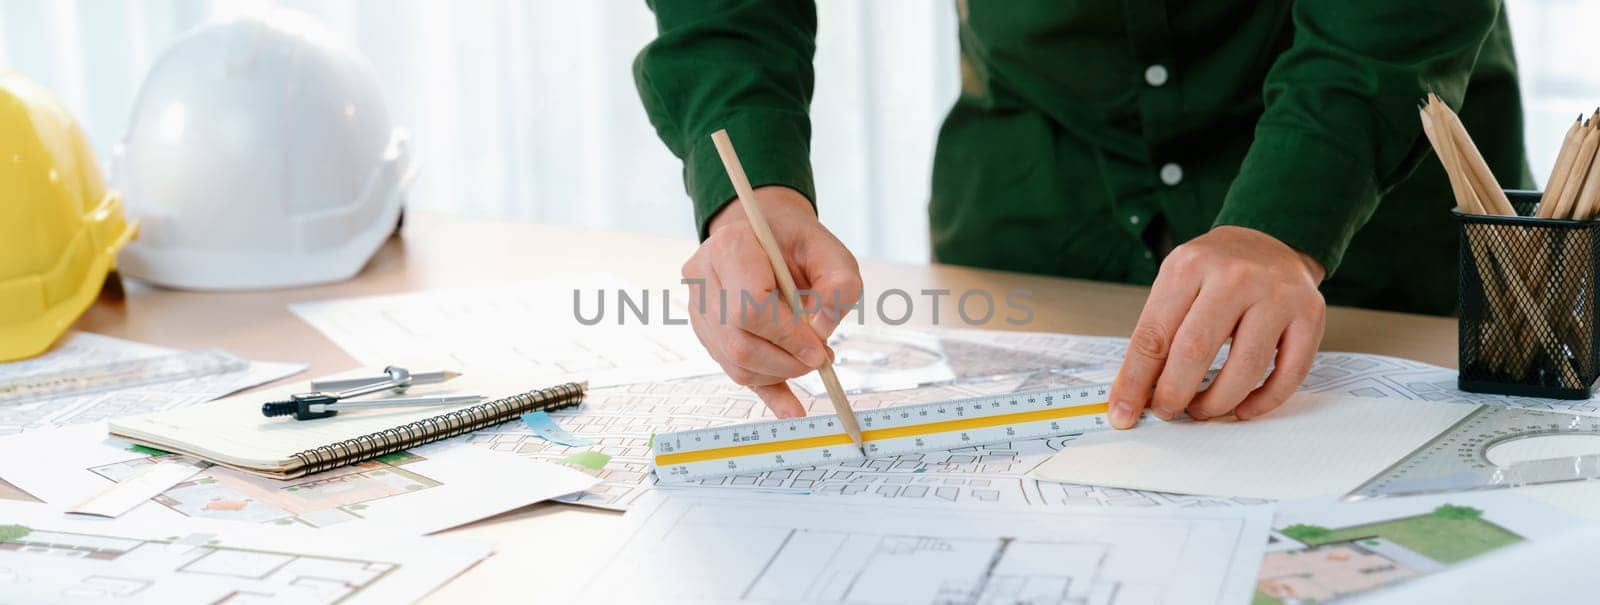 Professional engineer measuring the blueprint. Professional engineer working architectural project at studio on a table with yellow helmet and architectural equipment scatter around. Delineation.